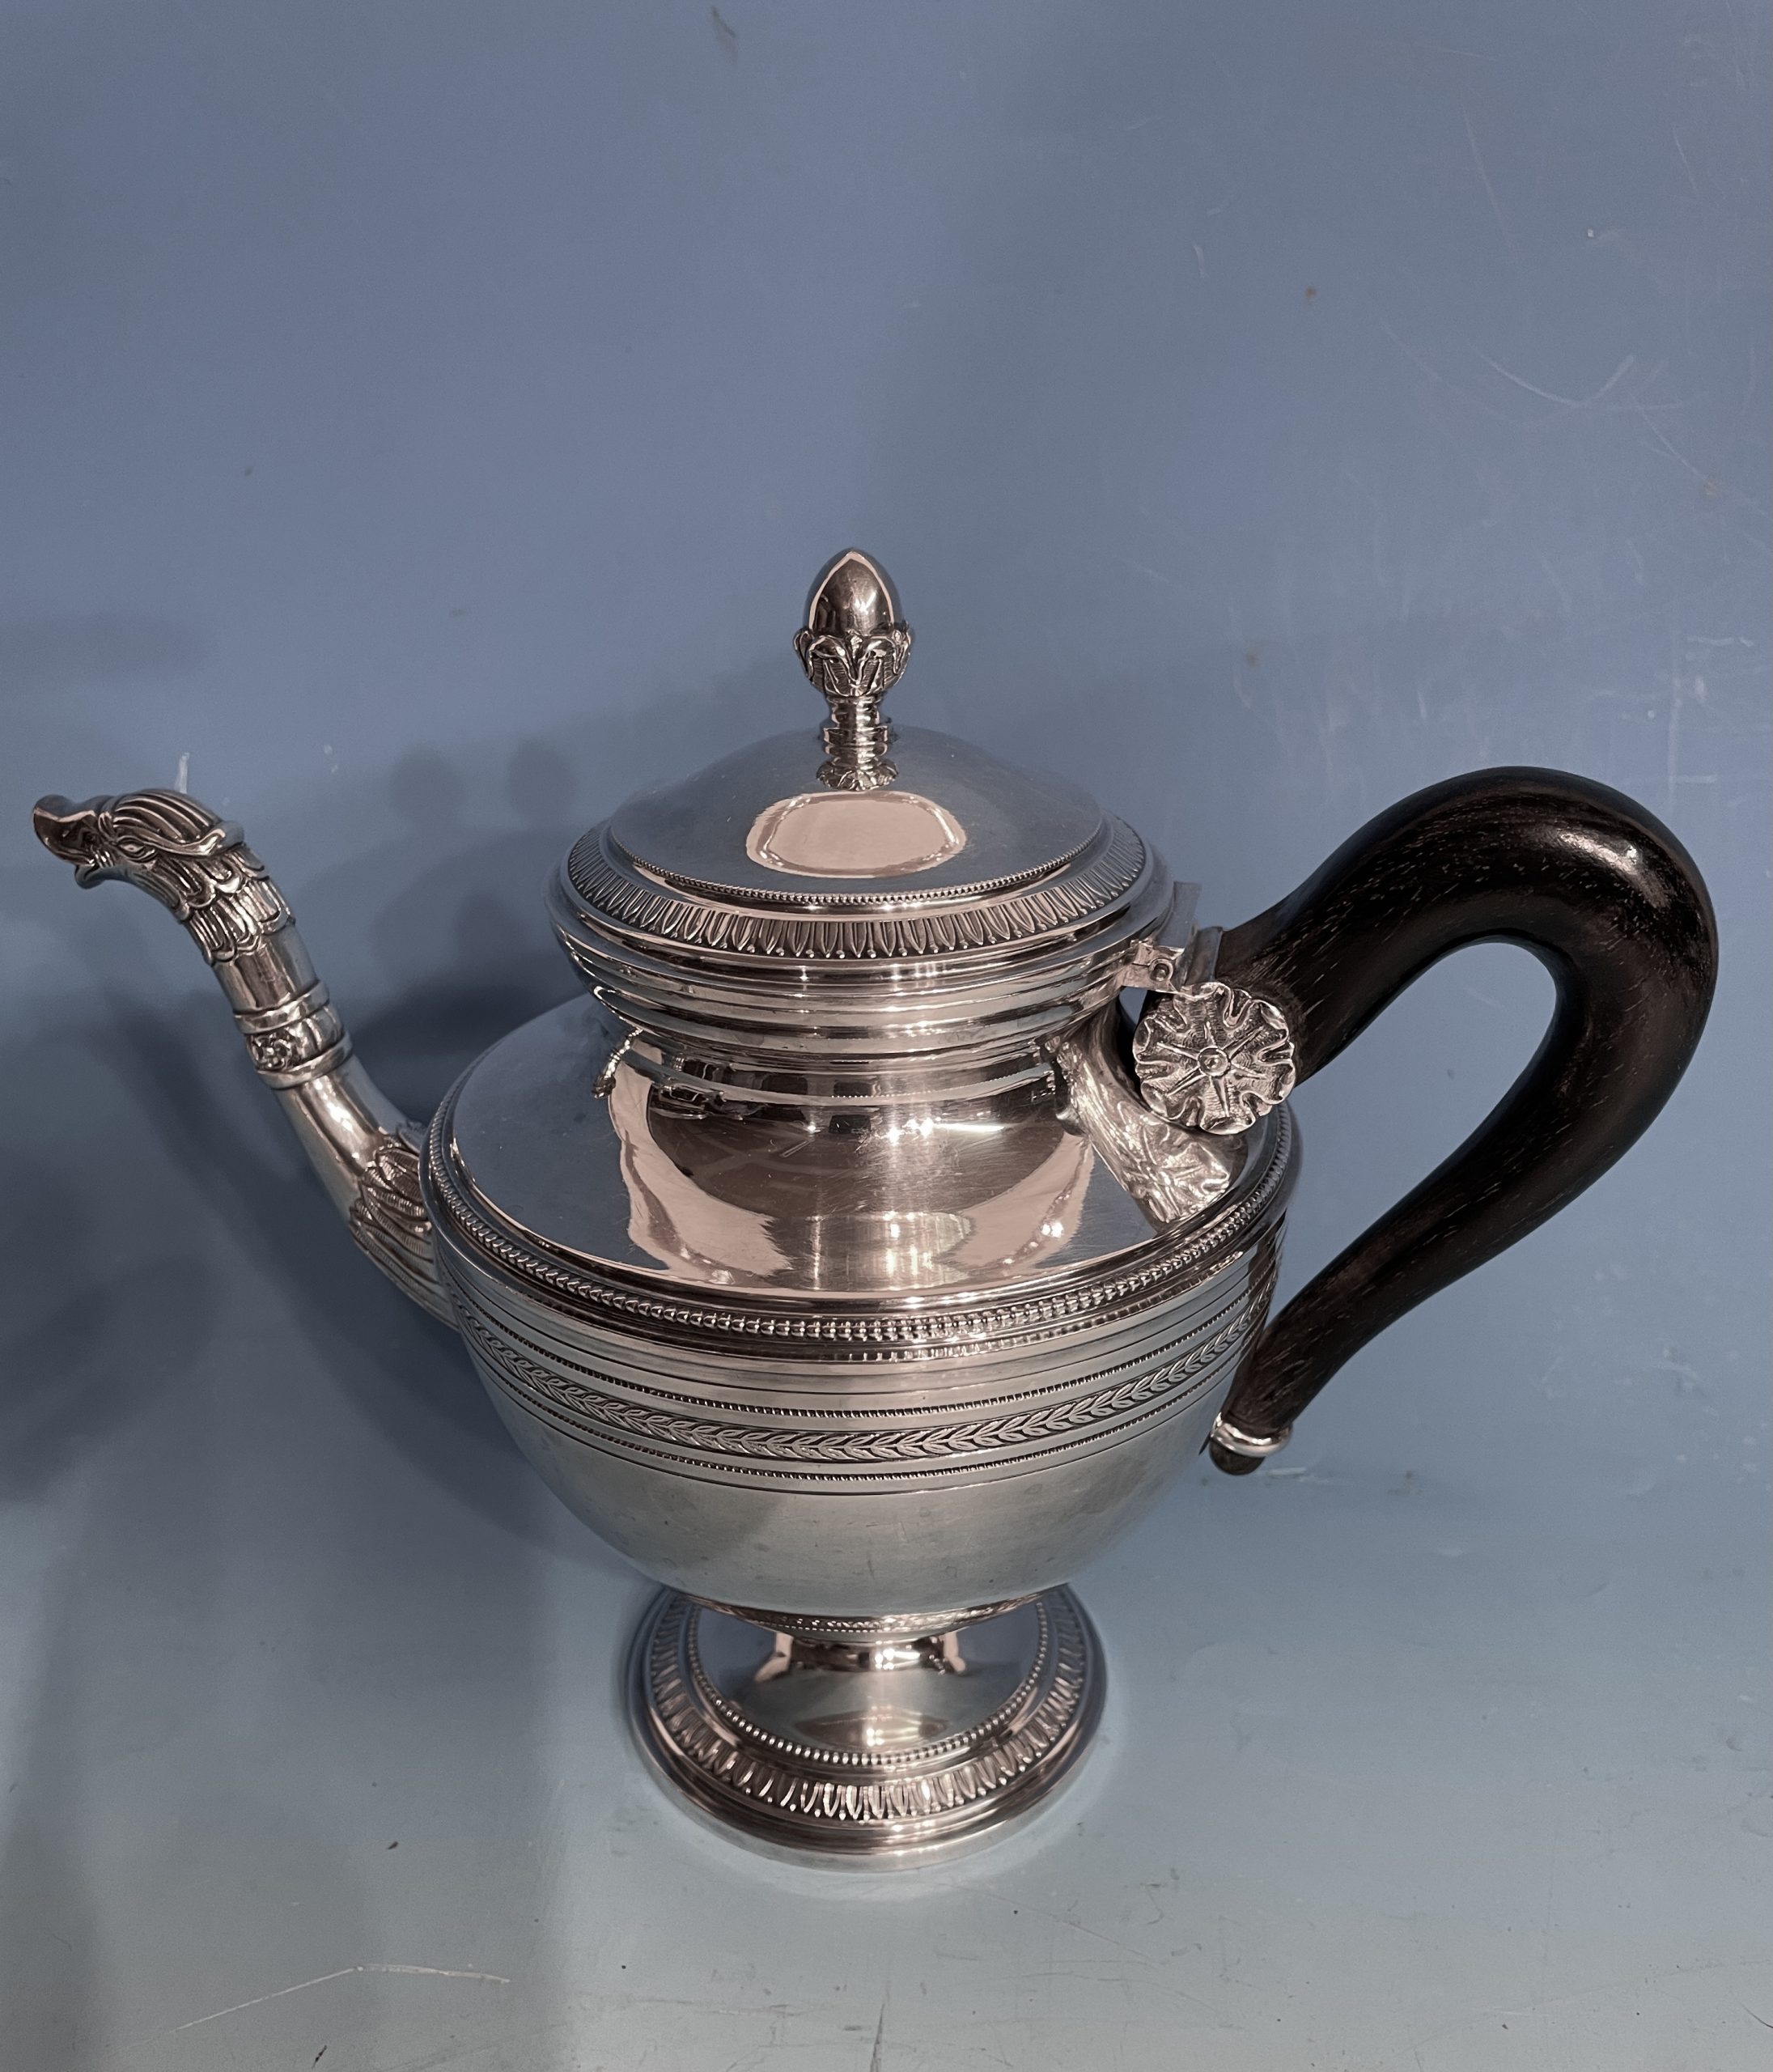 Coffee and Tea Set Silver- Silver Sets for sale- Styylish